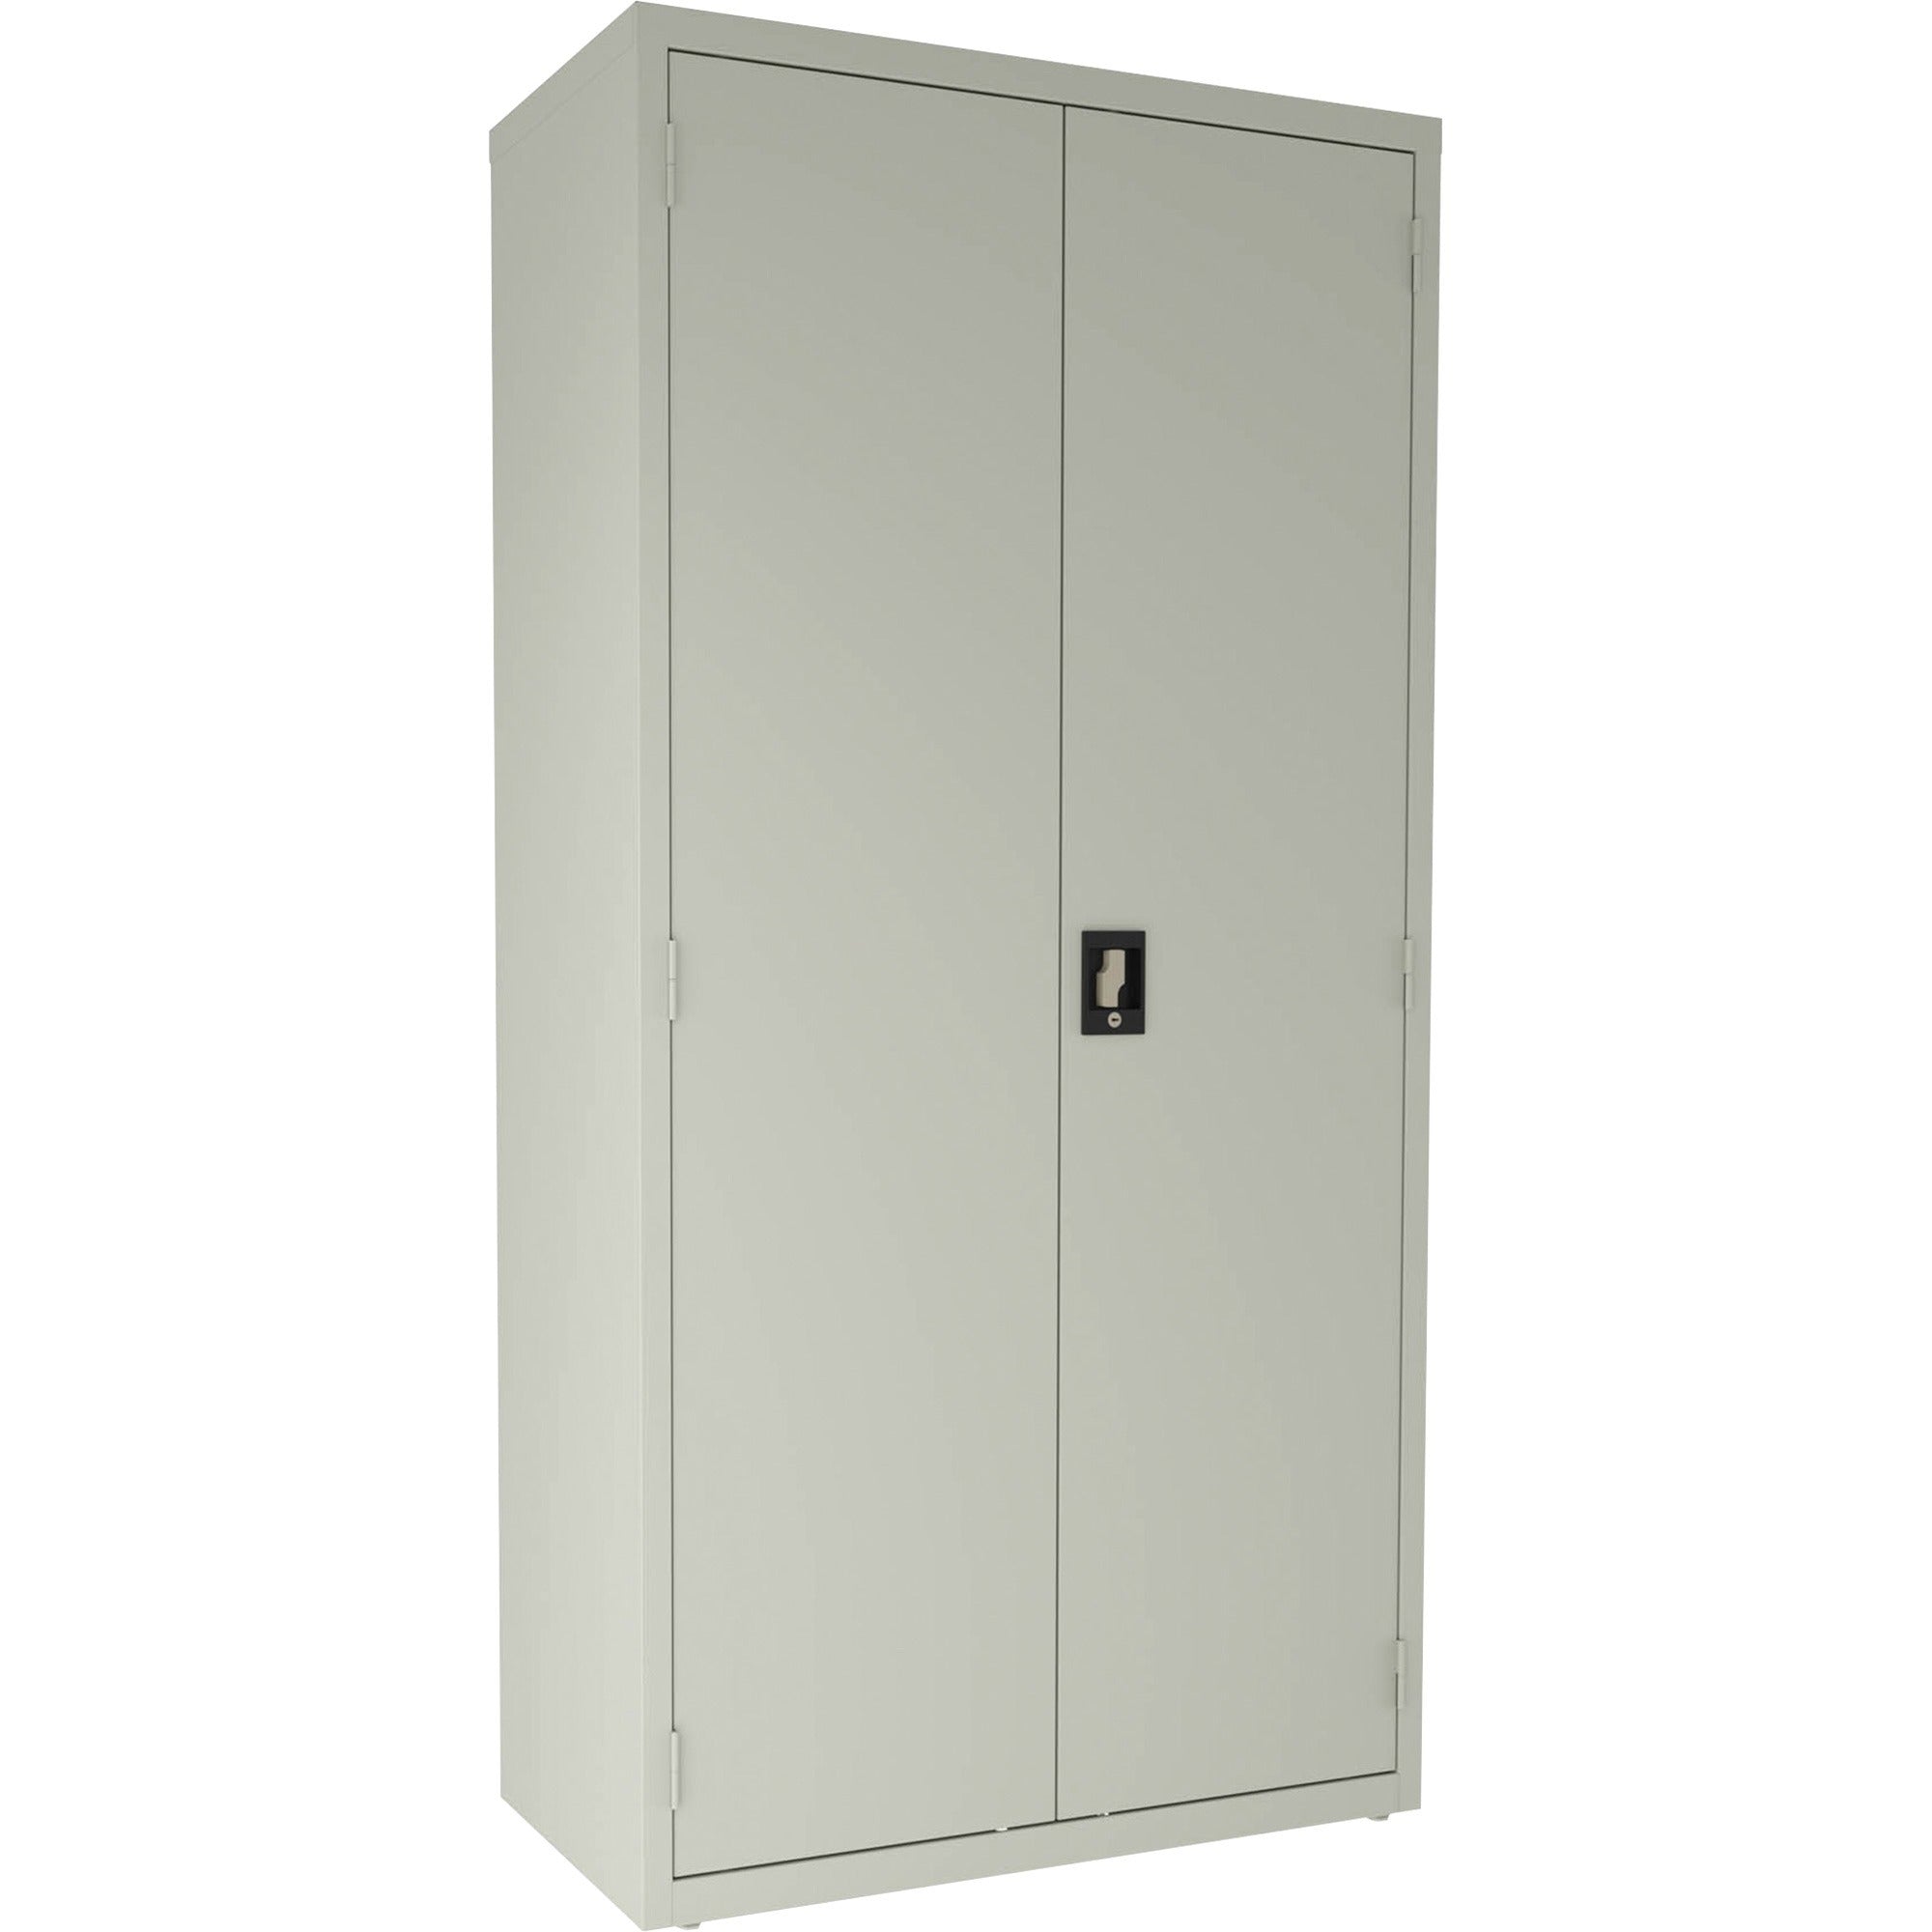 lorell-fortress-series-janitorial-cabinet-36-x-18-x-72-4-x-shelfves-hinged-doors-locking-system-welded-sturdy-recessed-locking-handle-durable-removable-lock-storage-space-adjustable-shelf-light-gray-powder-coated-recycled_llr00019 - 1